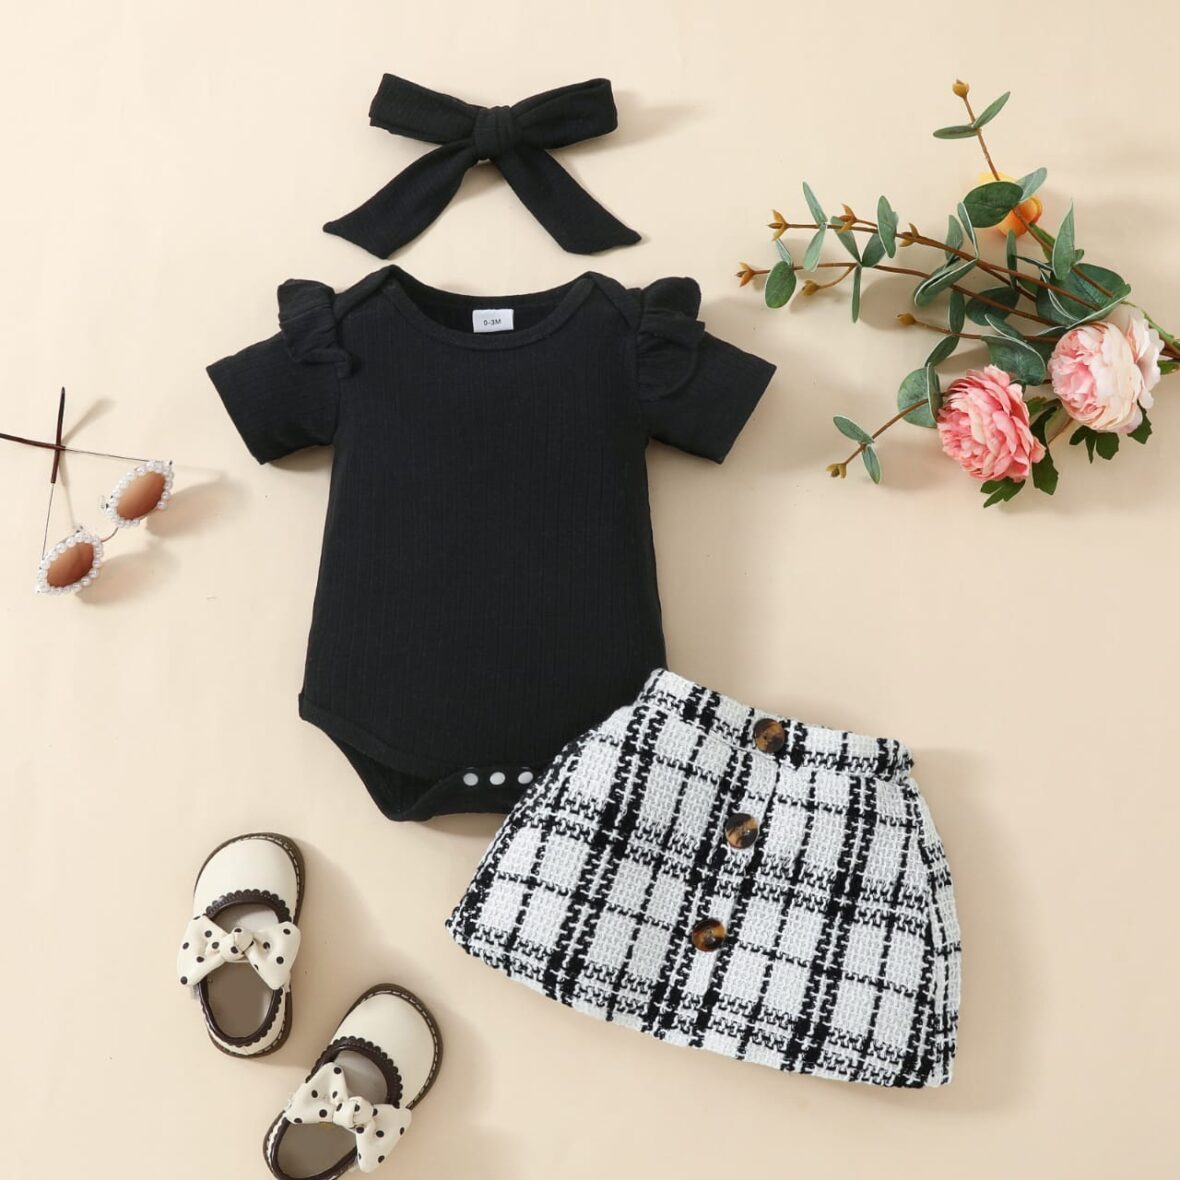 New Born, Baby Girl Black Top With Plaid Skirt2